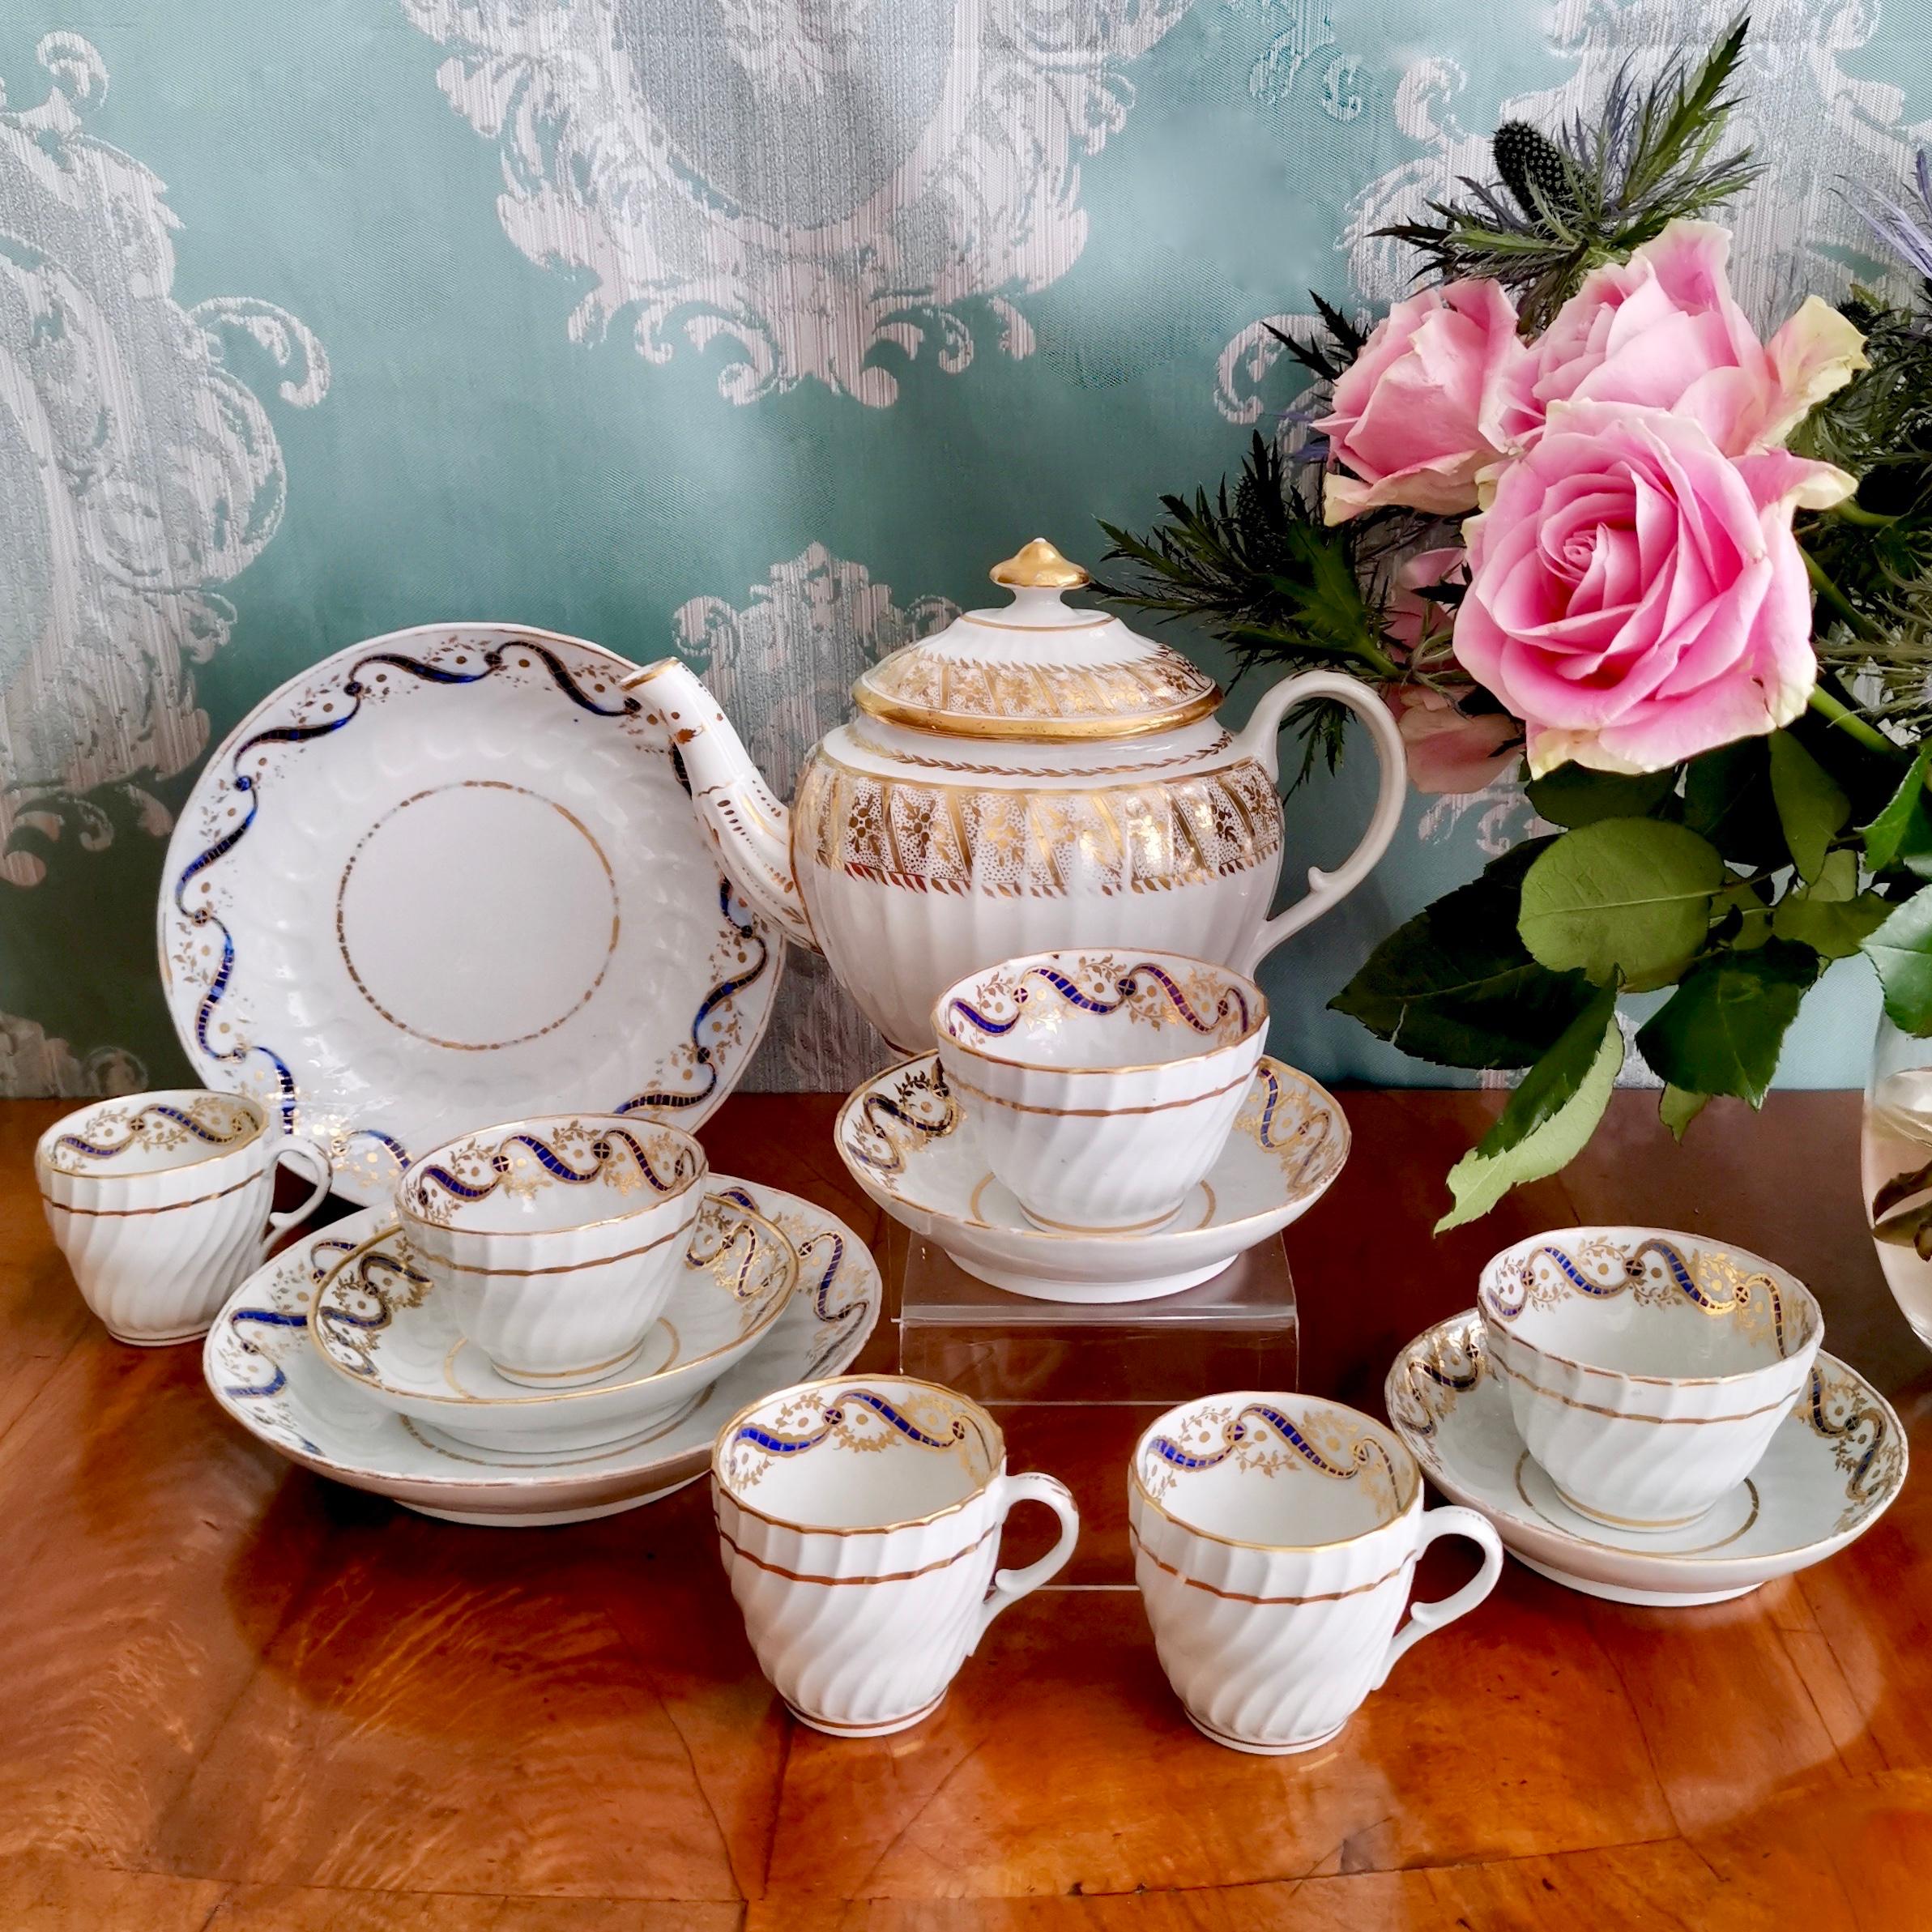 This is a beautiful tea service made by John Rose (Early Coalport) in circa 1795, which was the Georgian era. The service is beautiful white with gilt decorations and it consists of a lidded teapot, two cake plates, and three trios each consisting